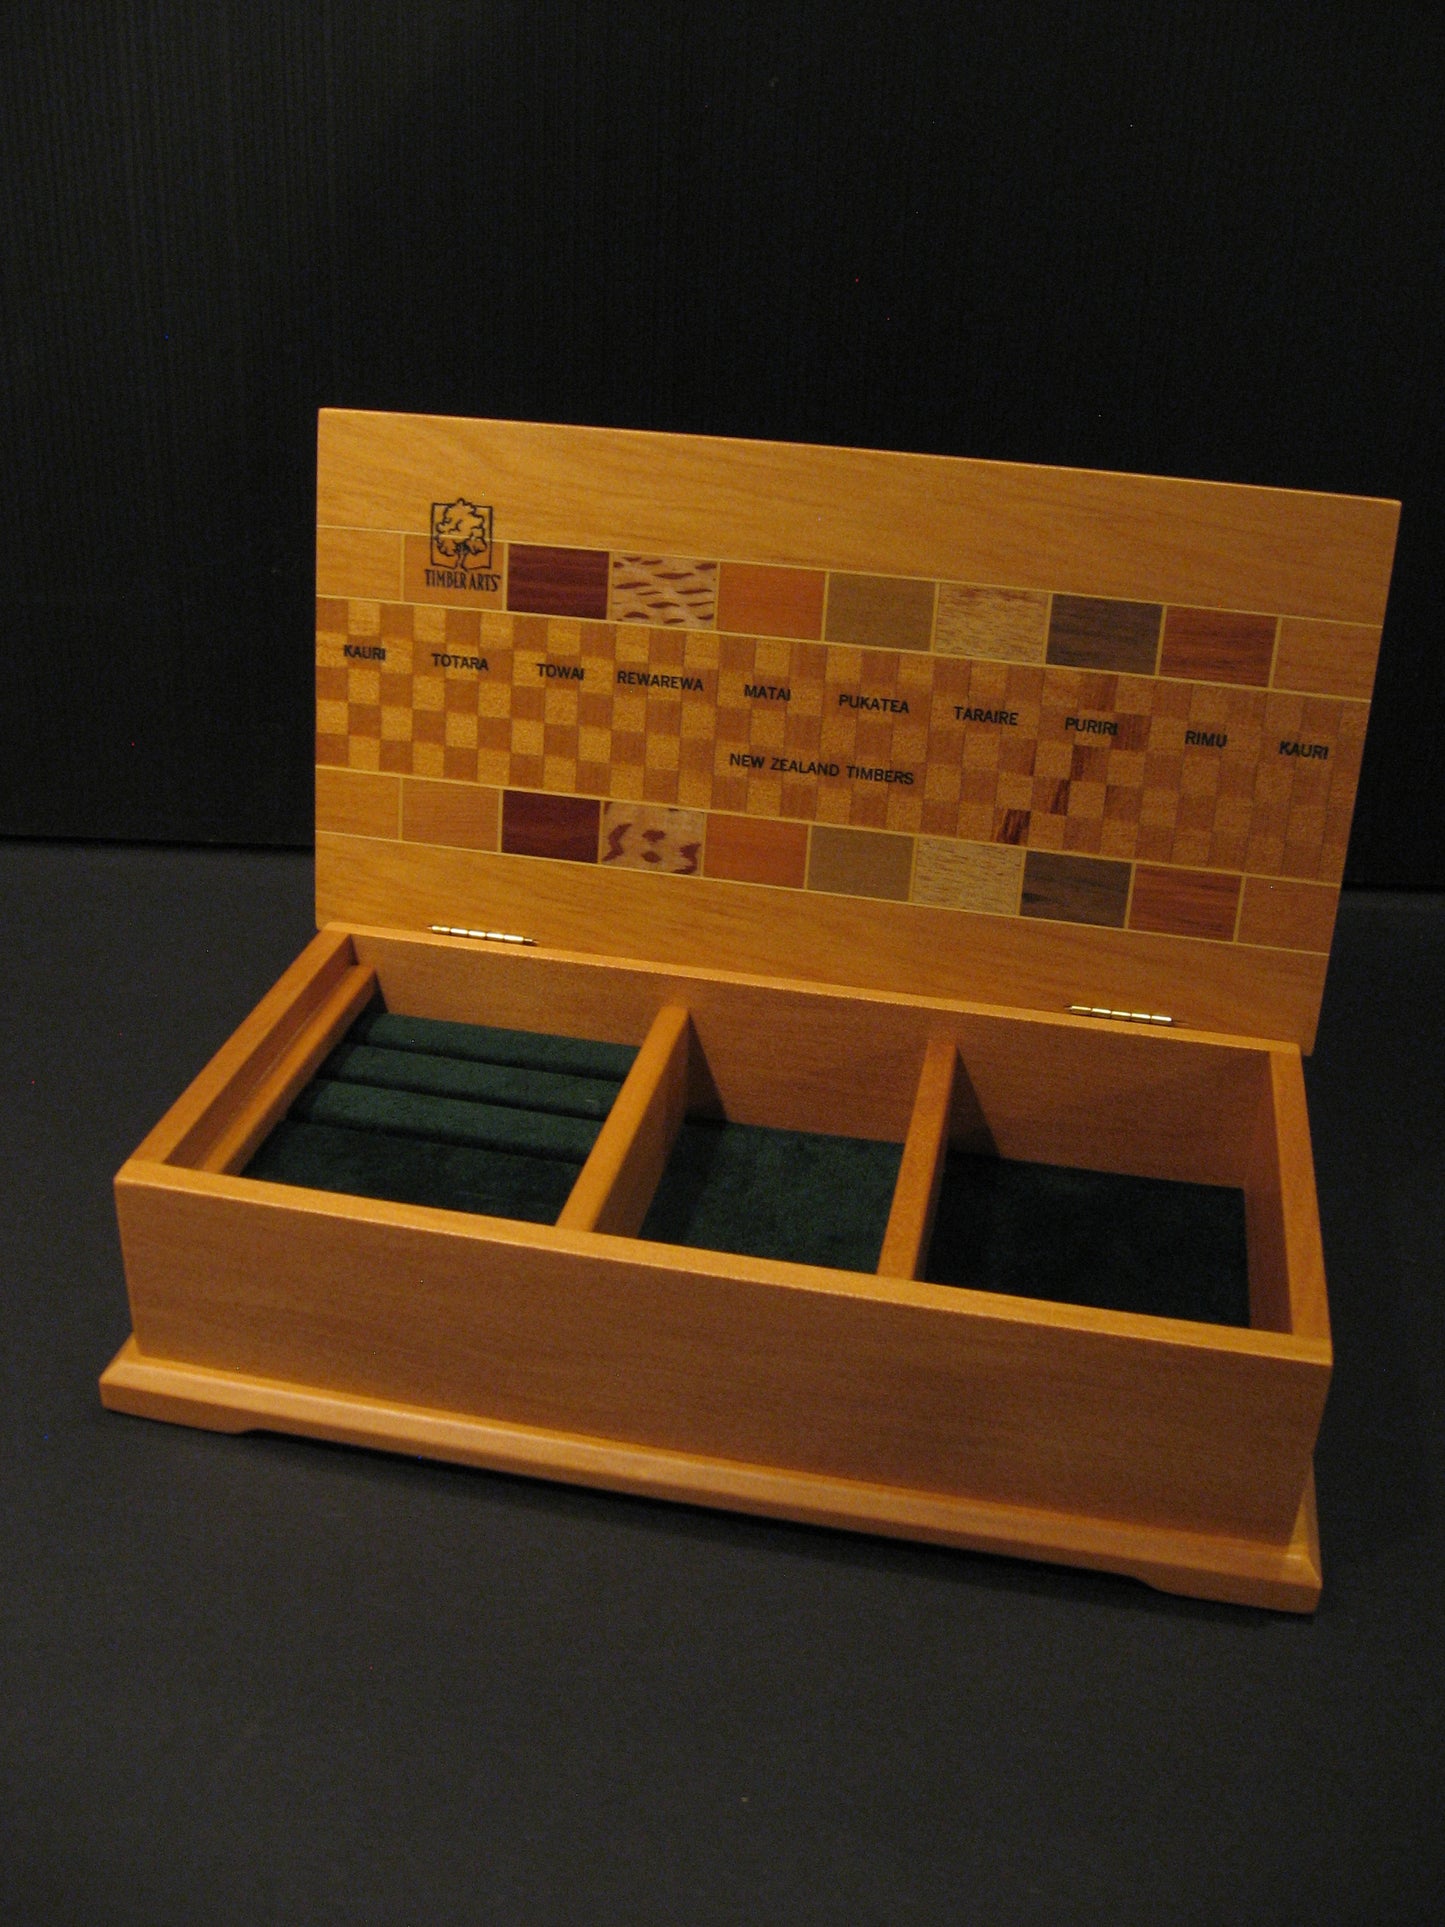 Inside Kauri Wood Jewellery Box Inlaid with Native Timbers by Timber Arts Silver Fern Gallery